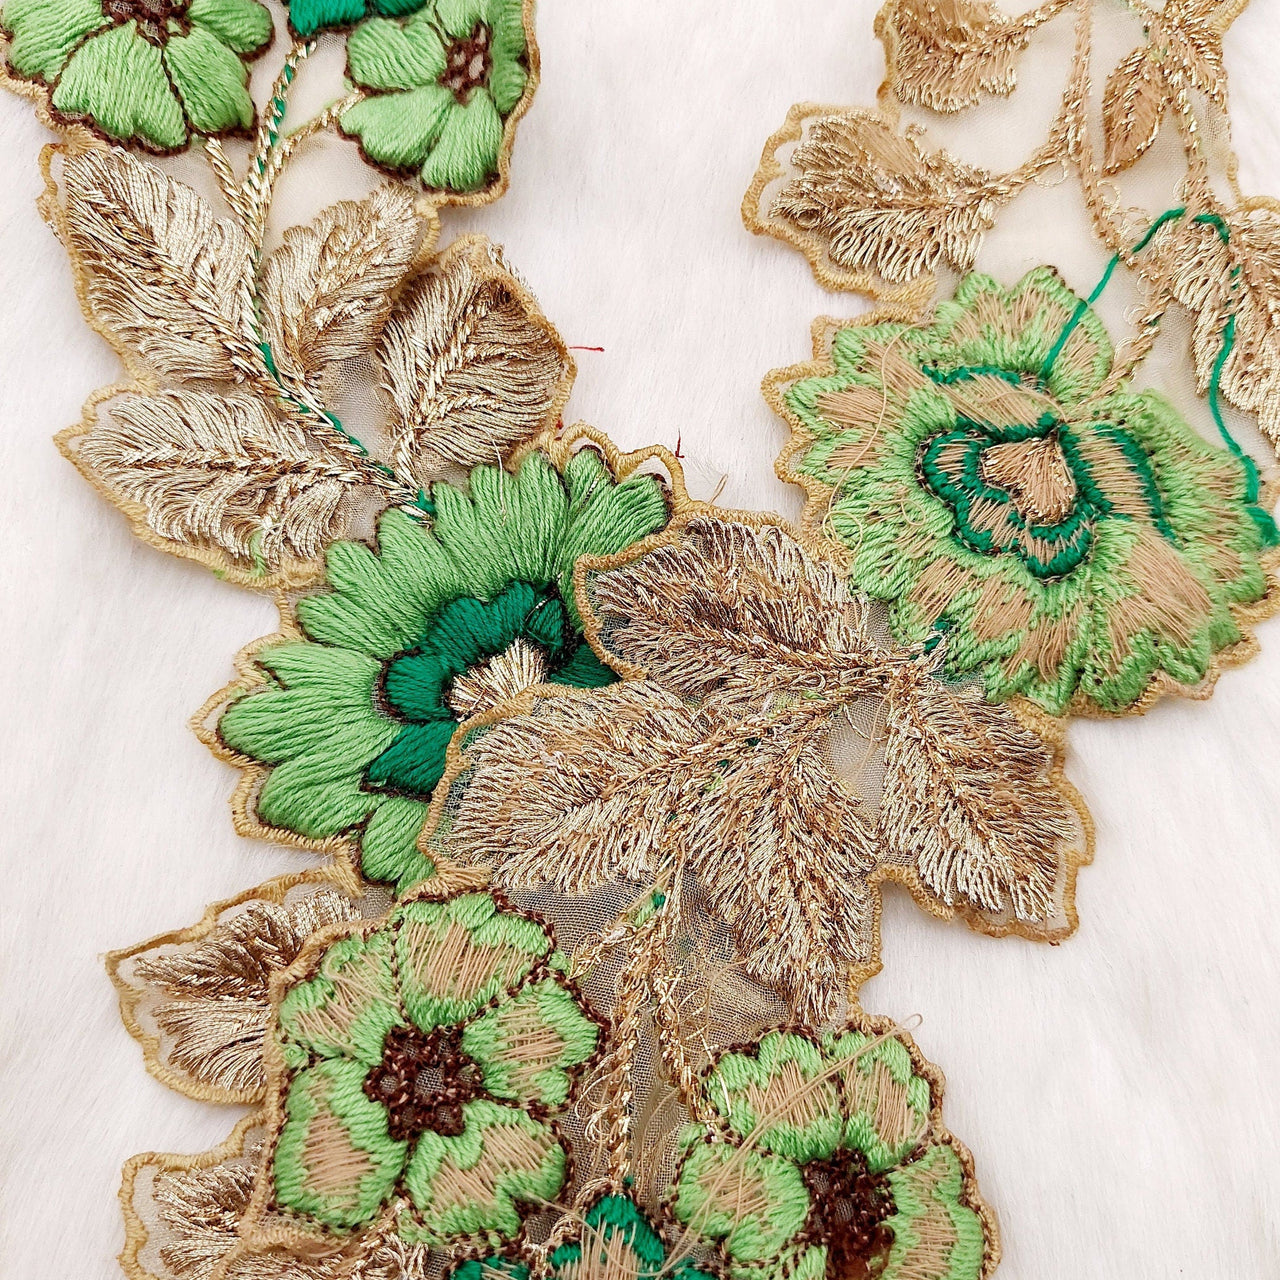 Green and Gold Floral Embroidered Trim, Tissue Fabric Cutwork Lace Flowers Embroidery, Floral Sari Trimming